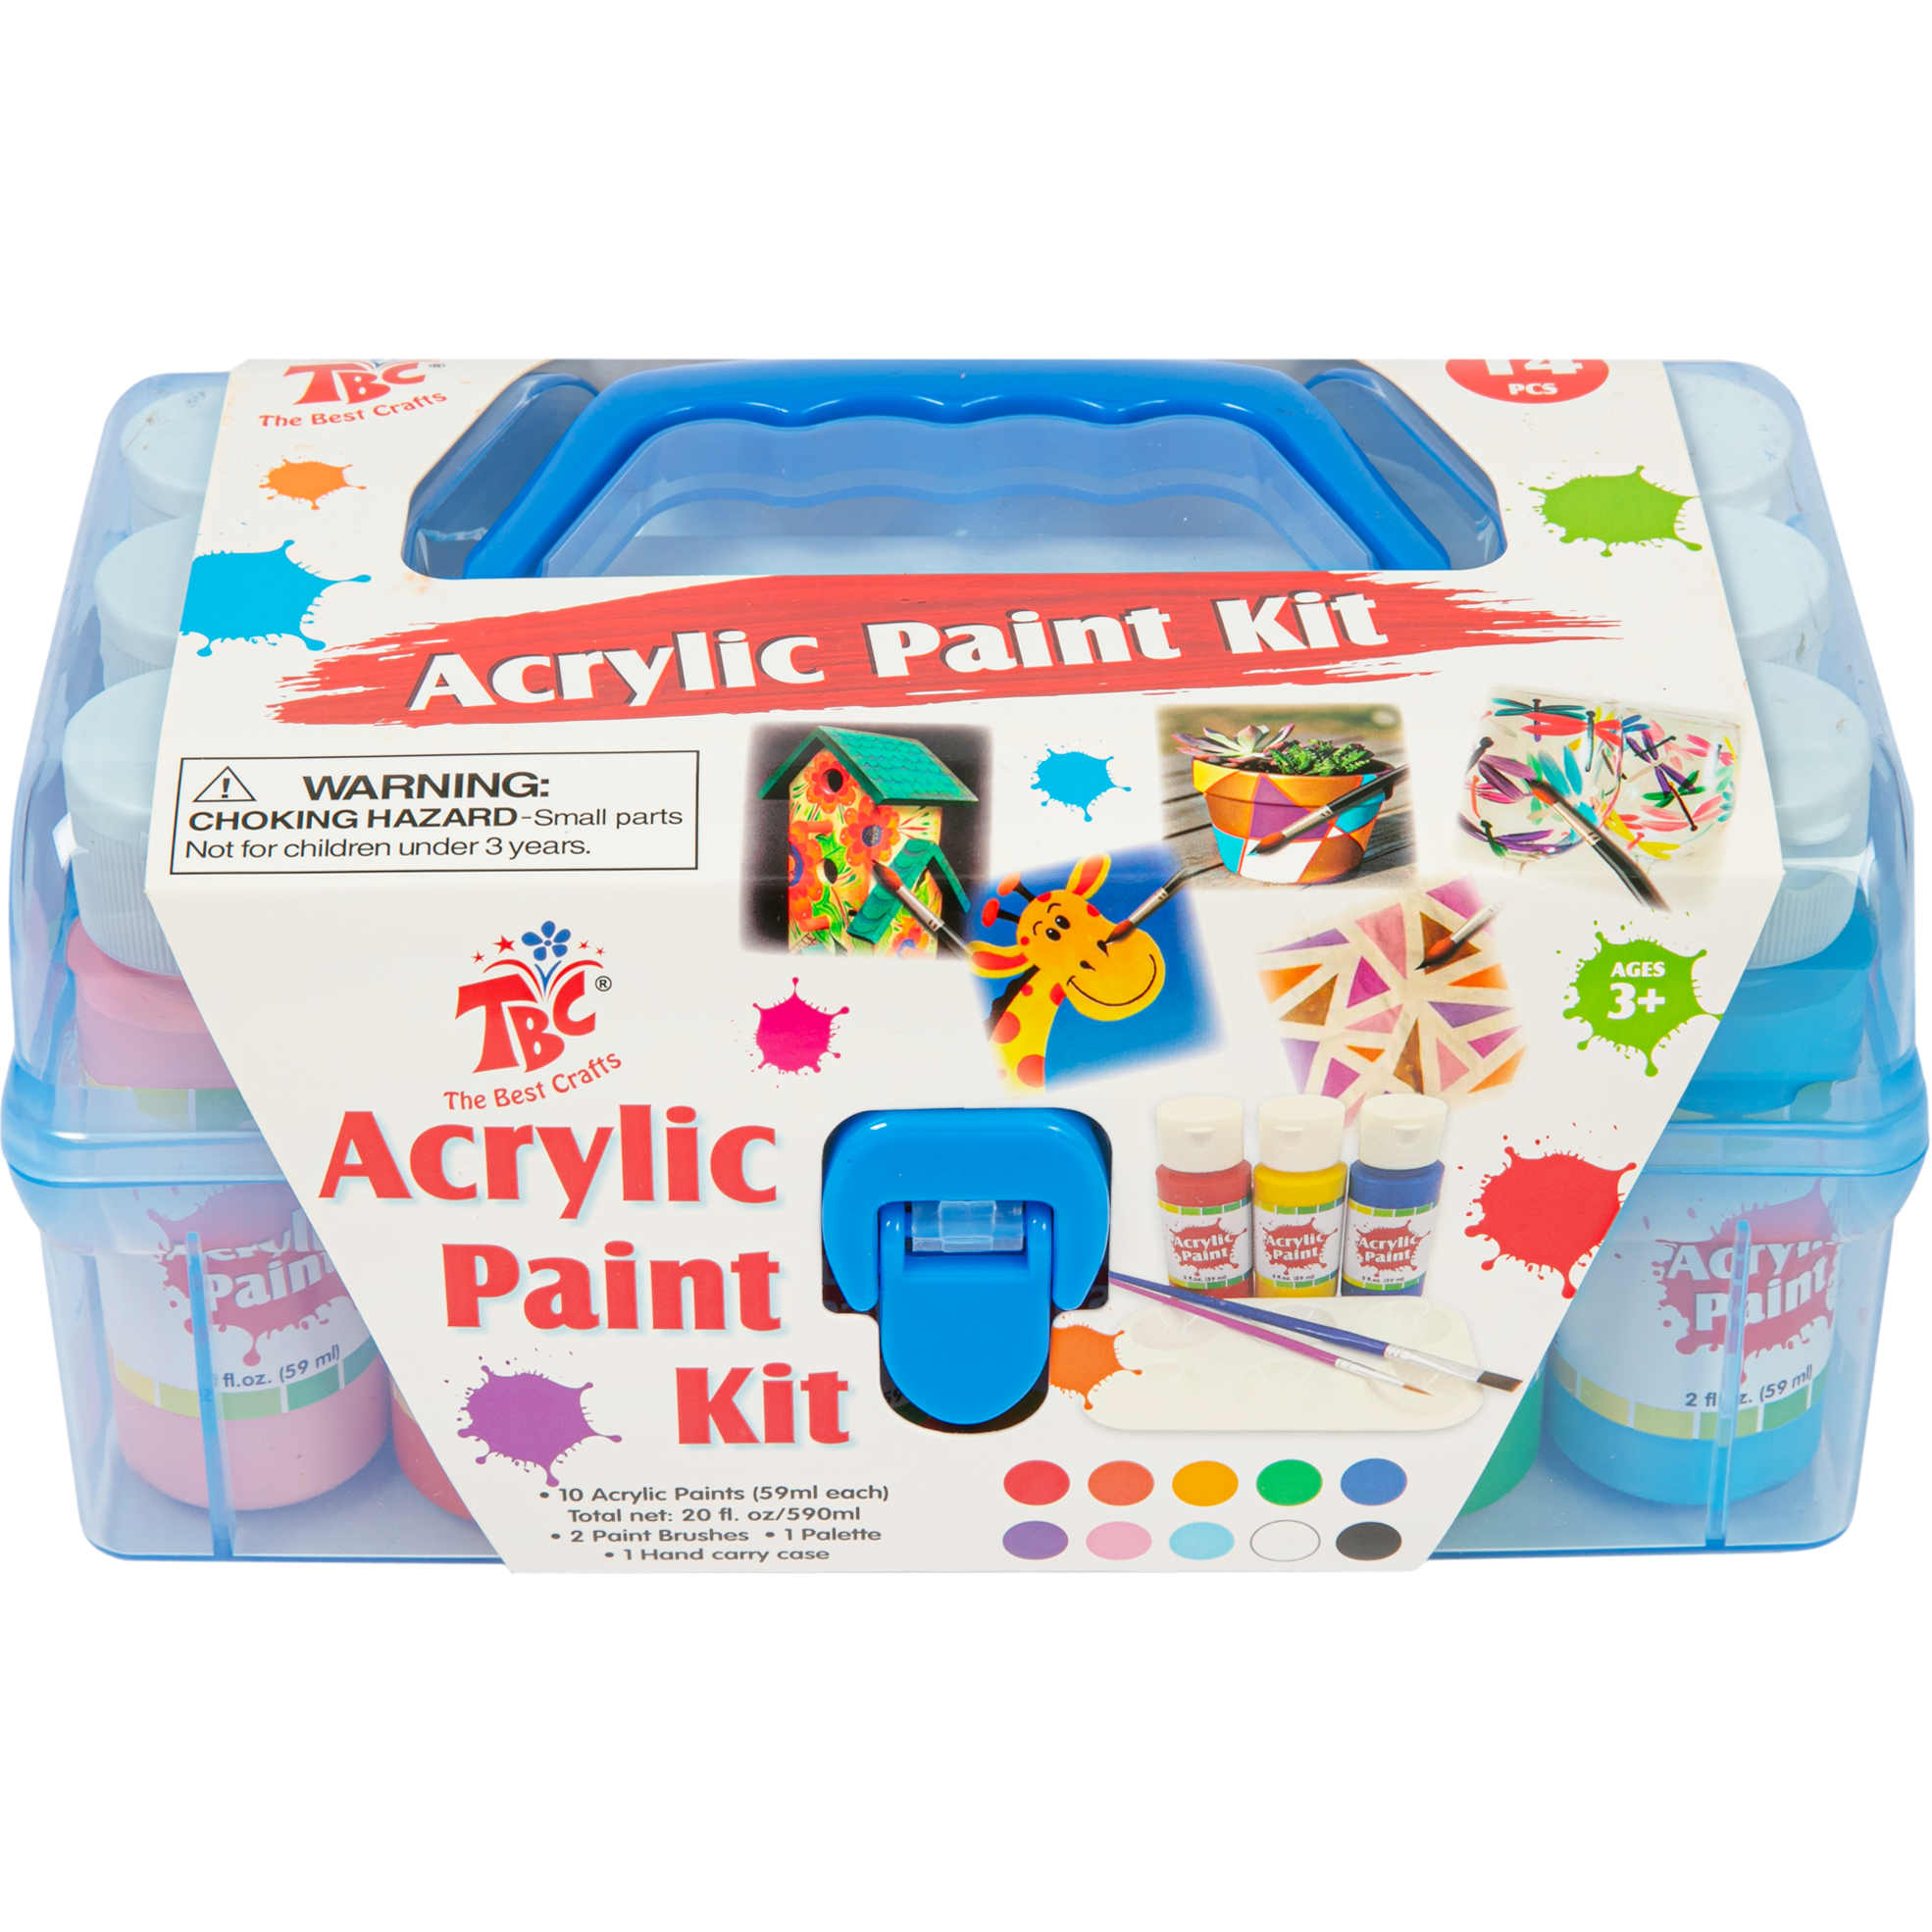 A wide variety of TBC Acrylic Paint Kit (14 Pieces) 496 is available